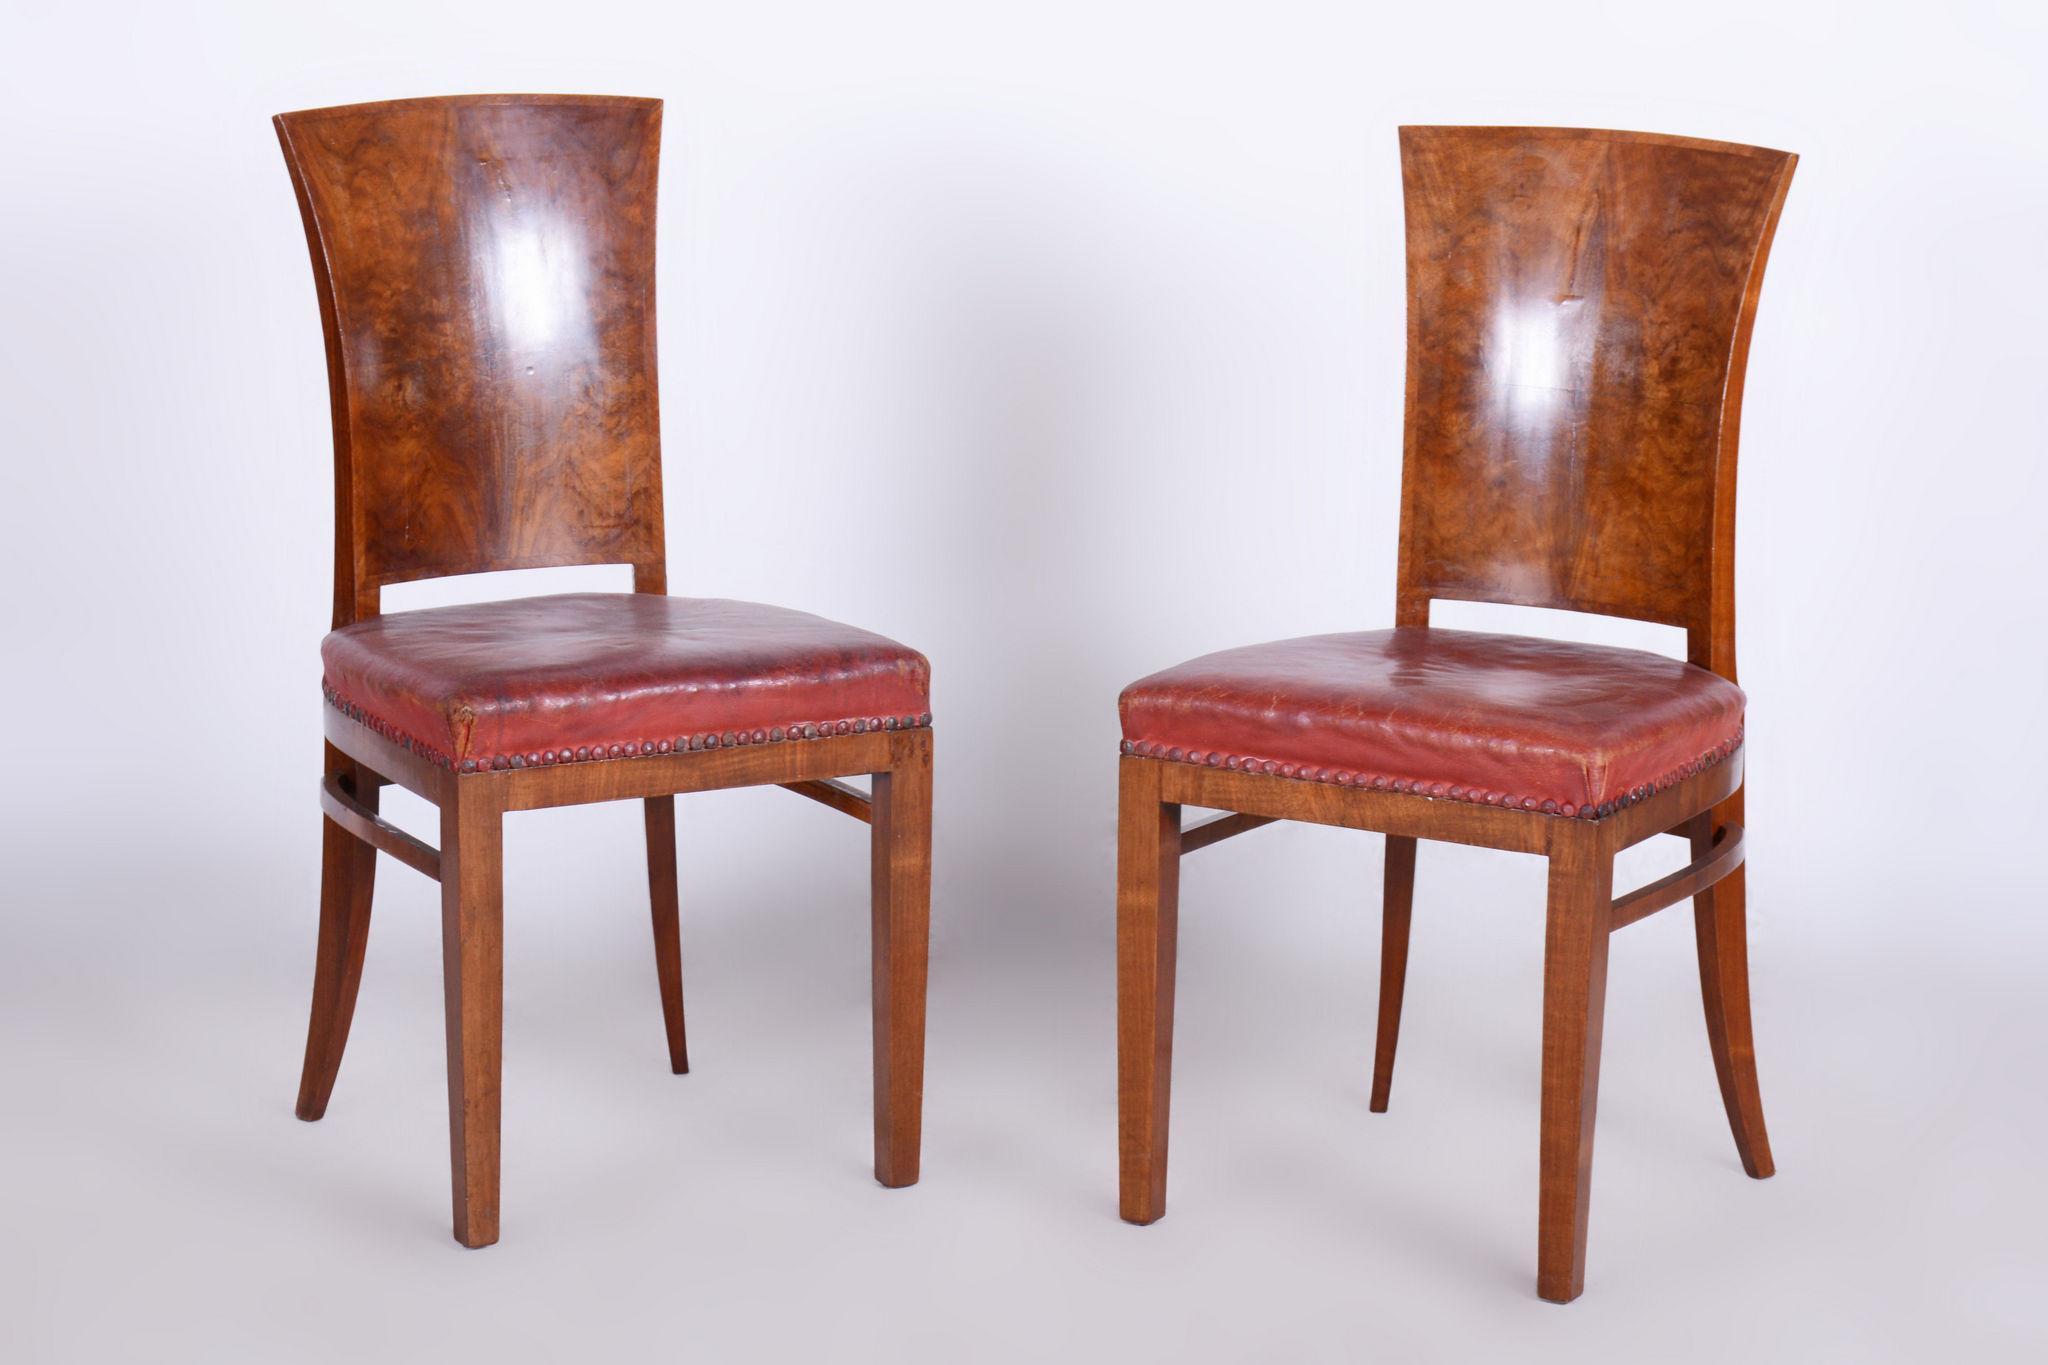 Six Art Deco Chairs, Walnut, Restored, Original Upholstery, France, 1920s For Sale 2